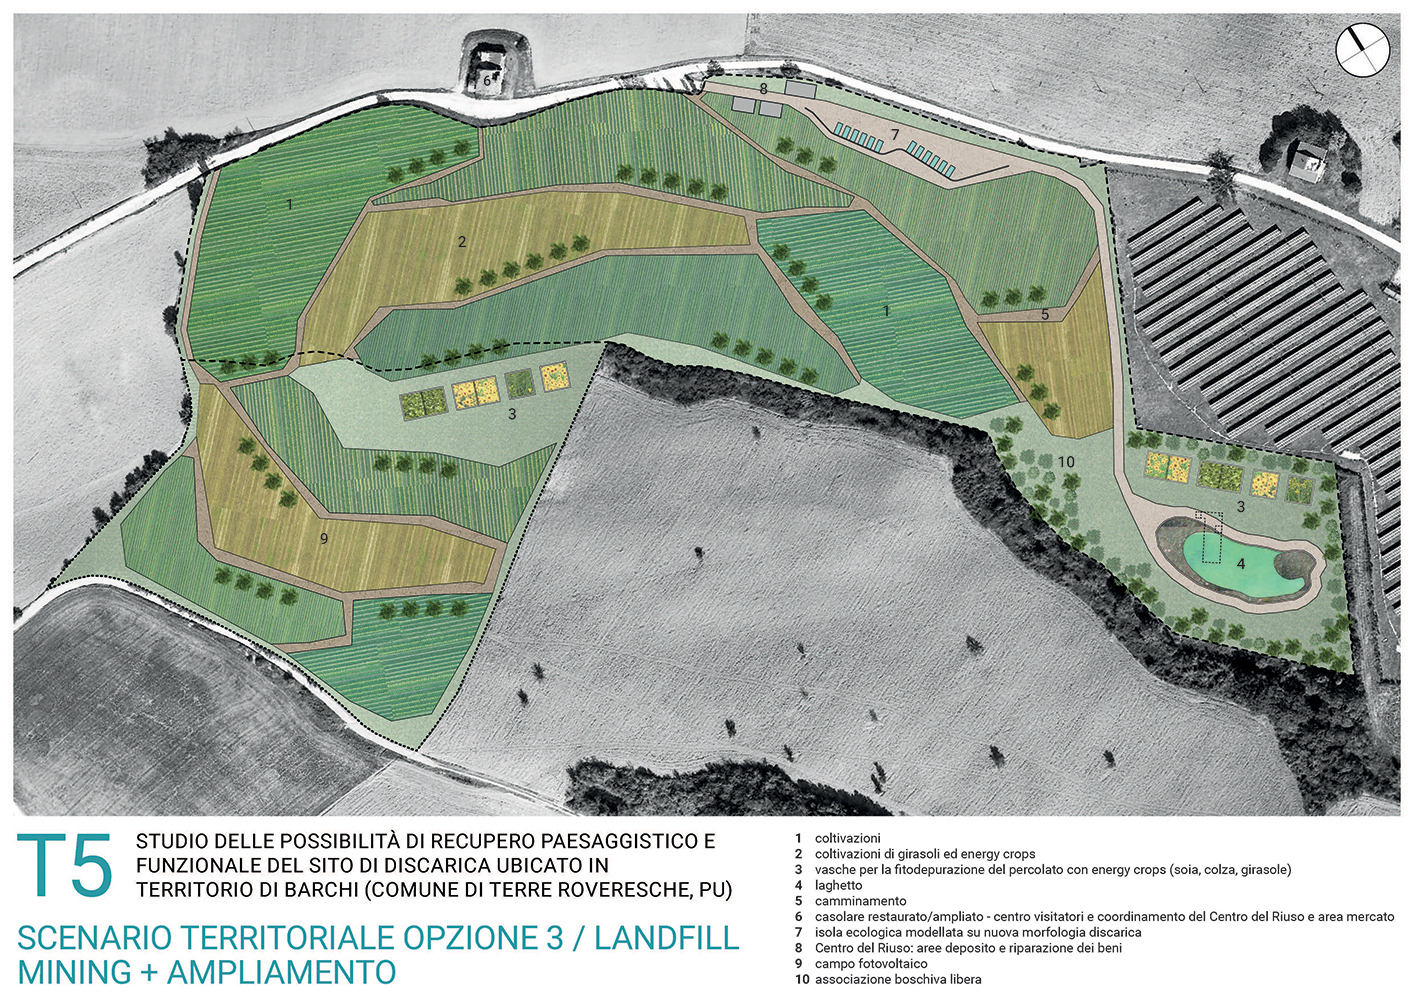 Study of the possibility of undertaking remedial and functional landscaping of the Ca’ Rafaneto di Barchi landfill (Pesaro and Urbino Province, IT)